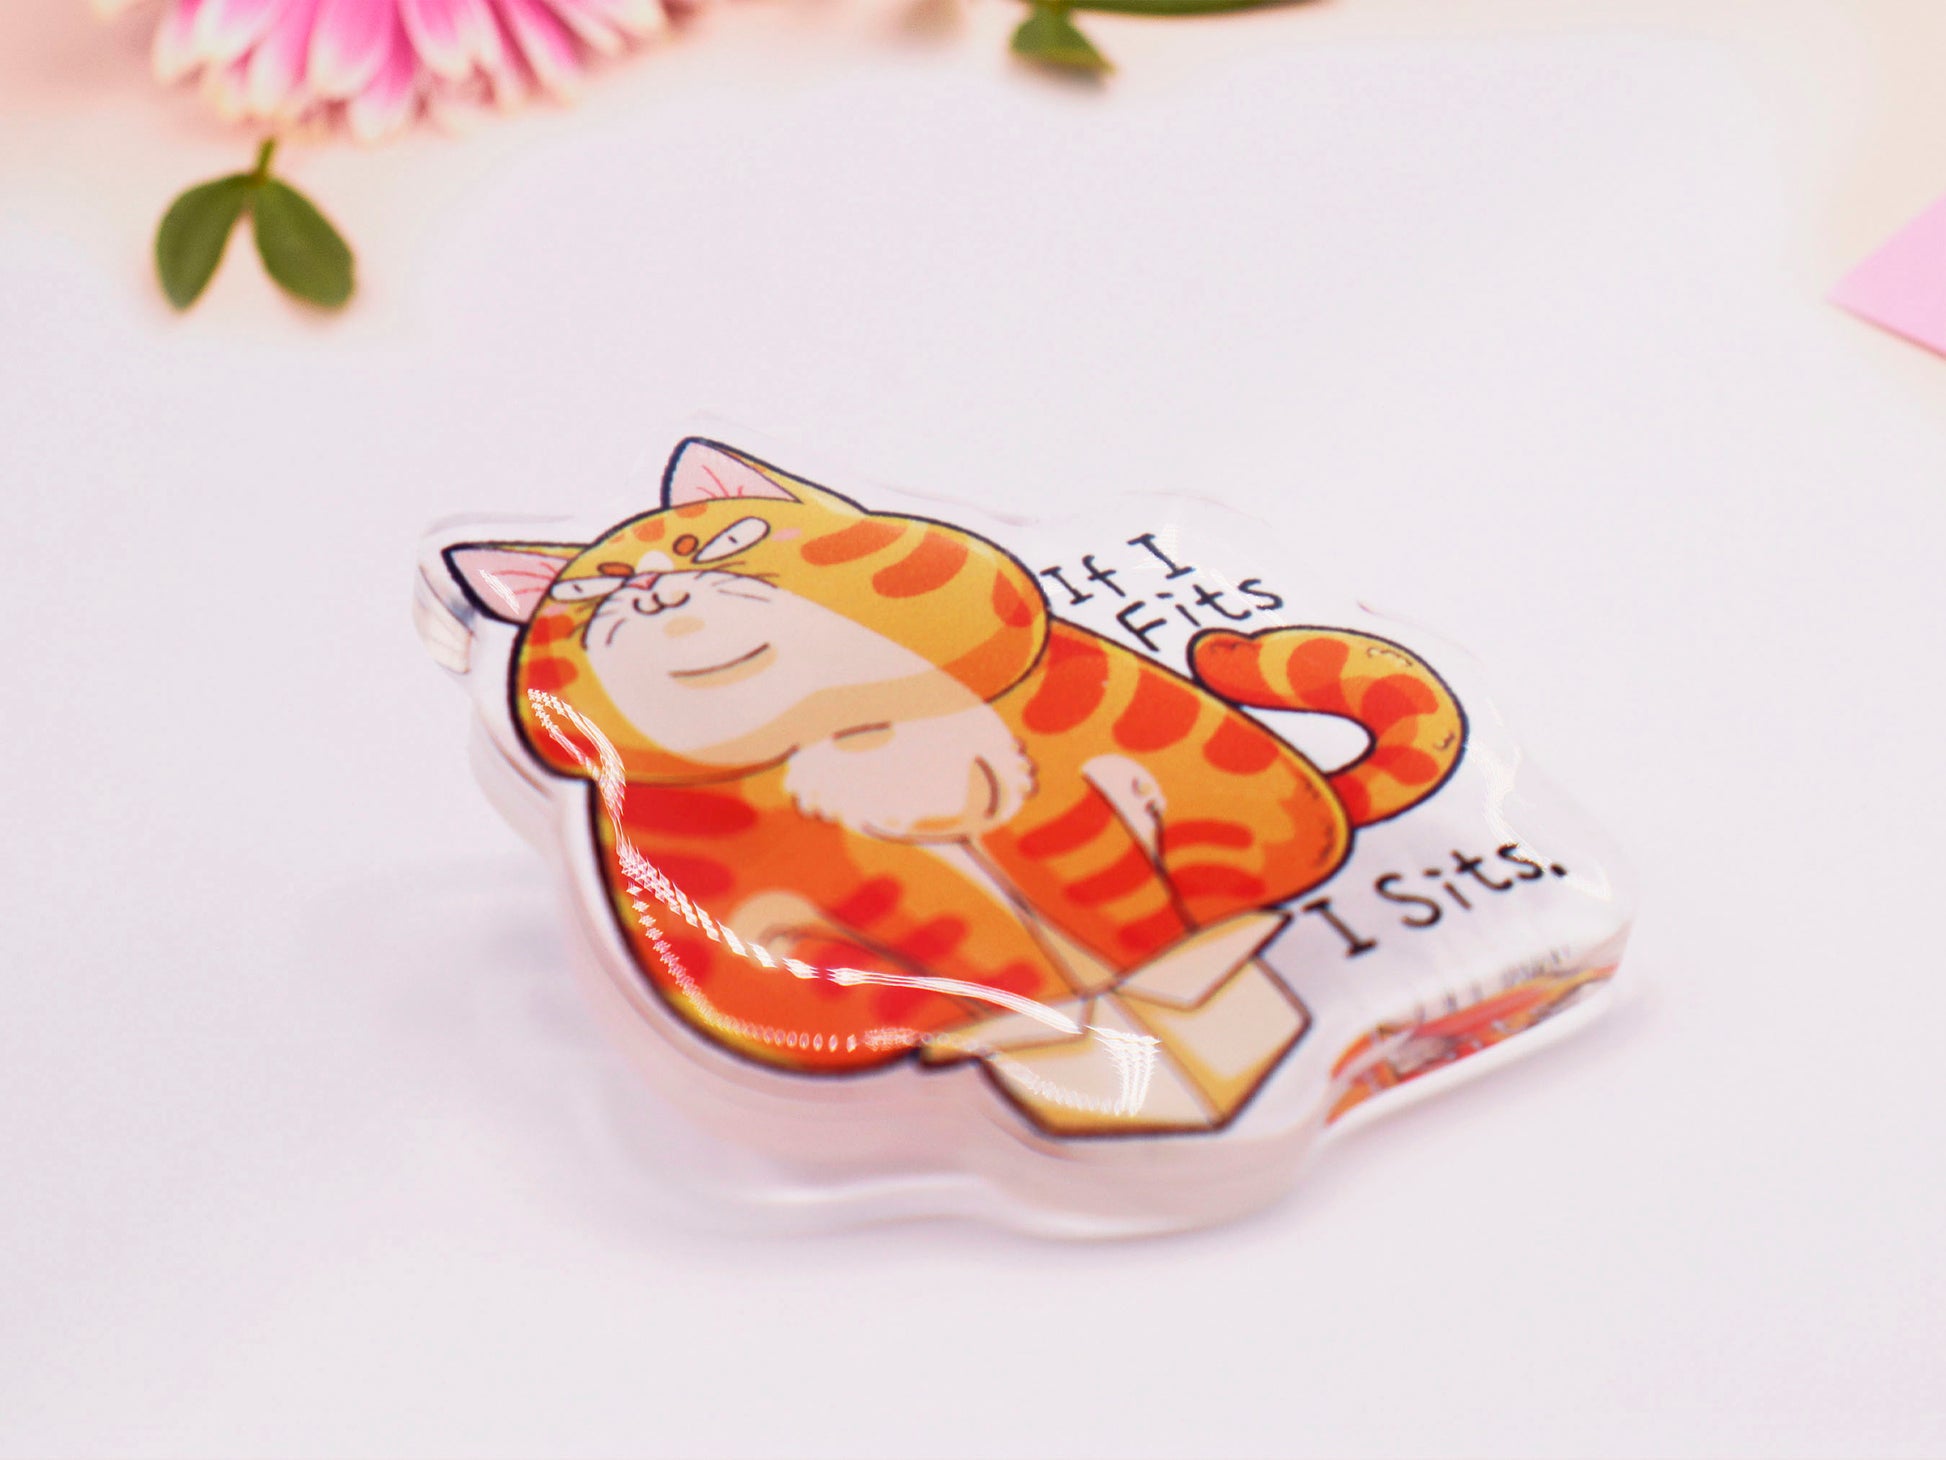 Acrylic pin badge on backing card of a fat ginger cat sat in a small cardboard box with the quote If I Fits I Sits.